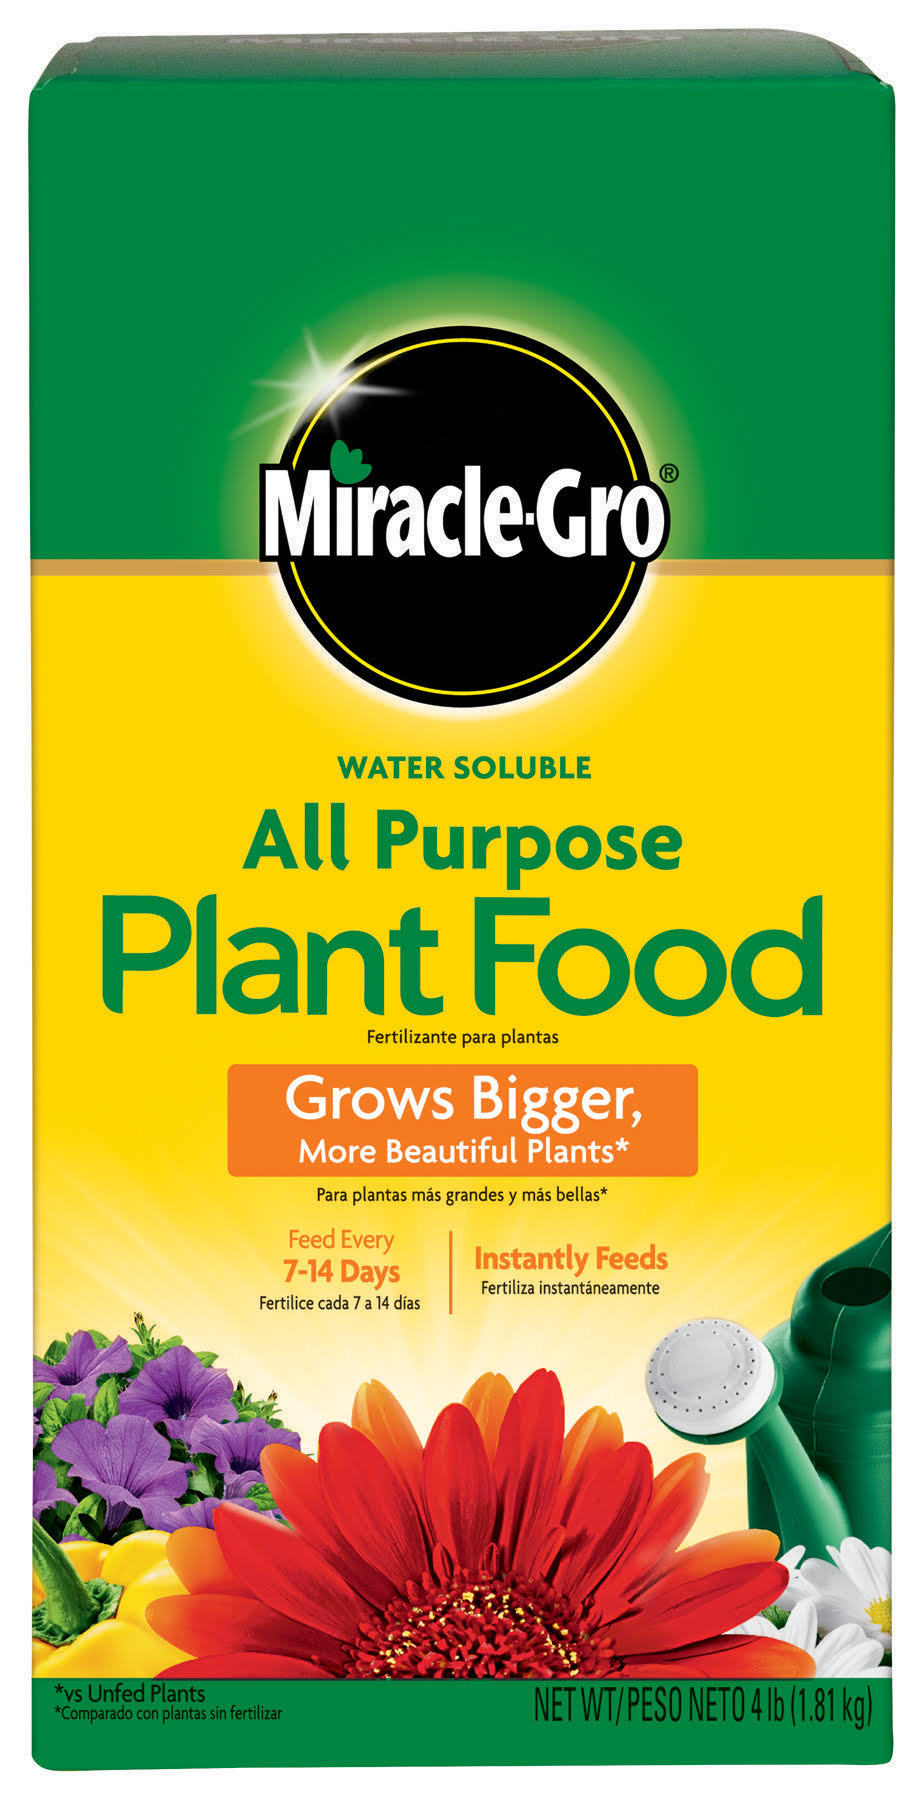 The Scotts Company Miracle Grow Water Soluble All Purpose Plant Food